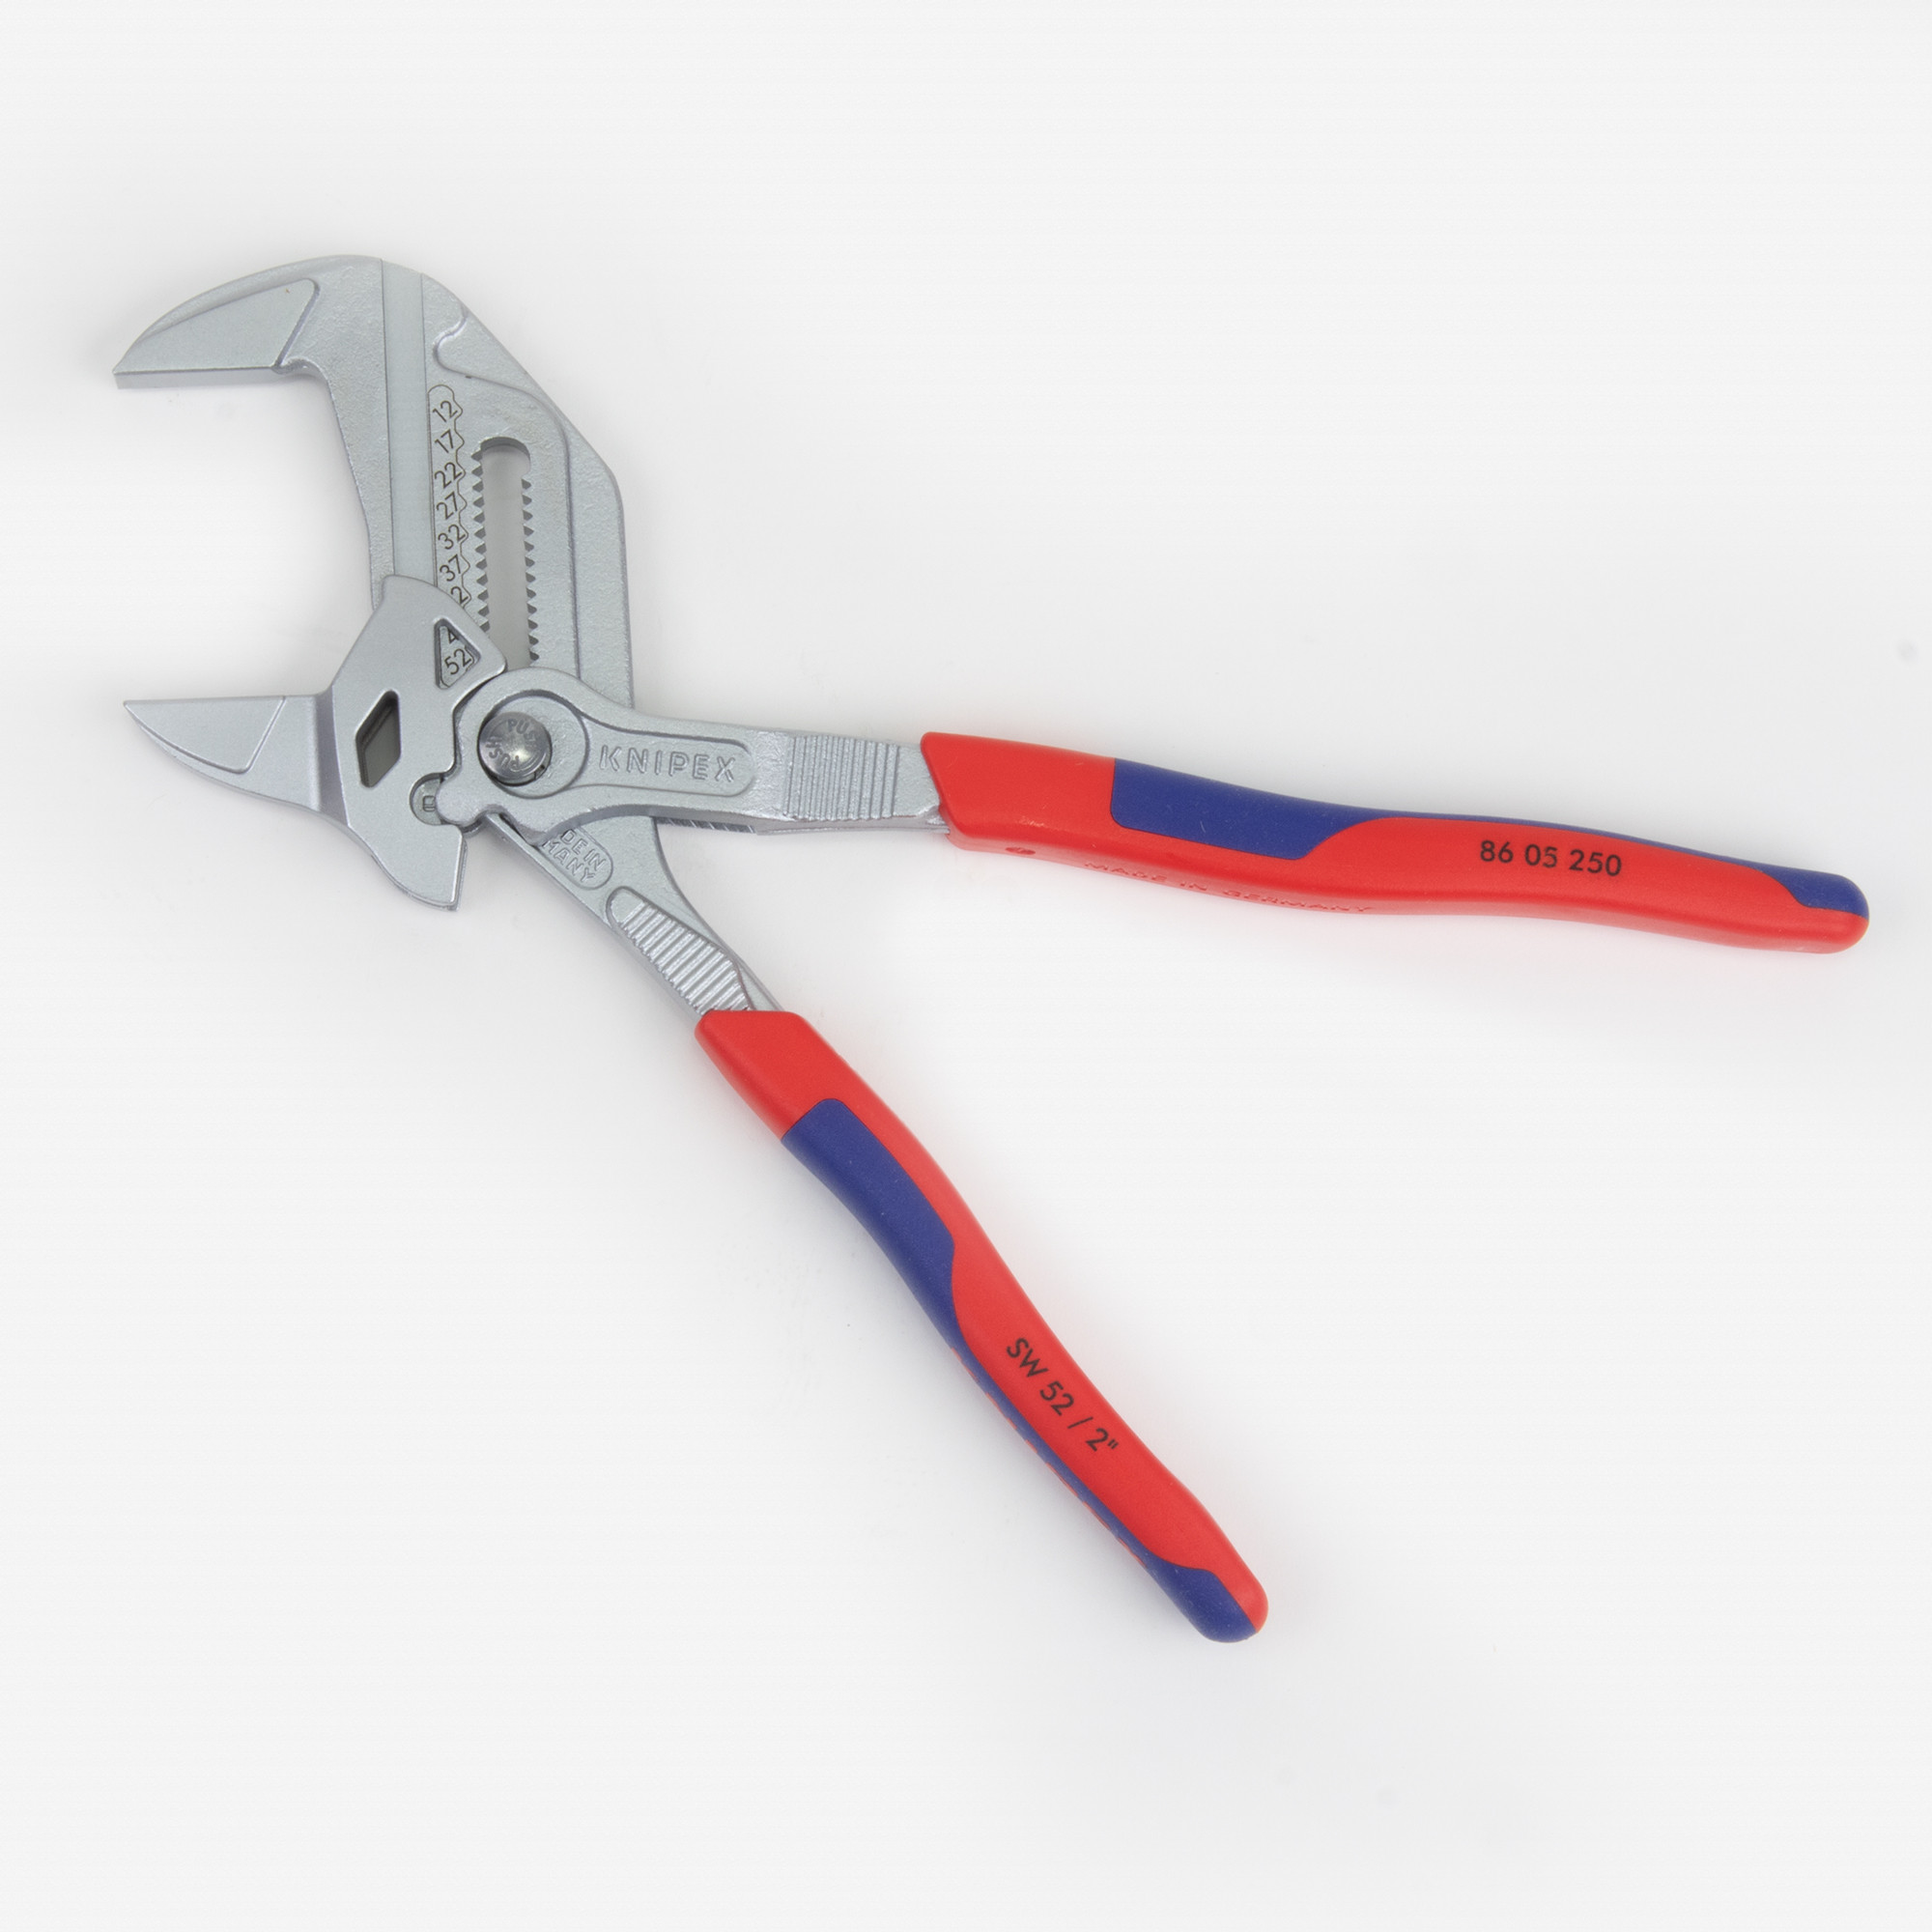 Knipex 86 05 250 10-Inch Pliers Wrench - Comfort Grip